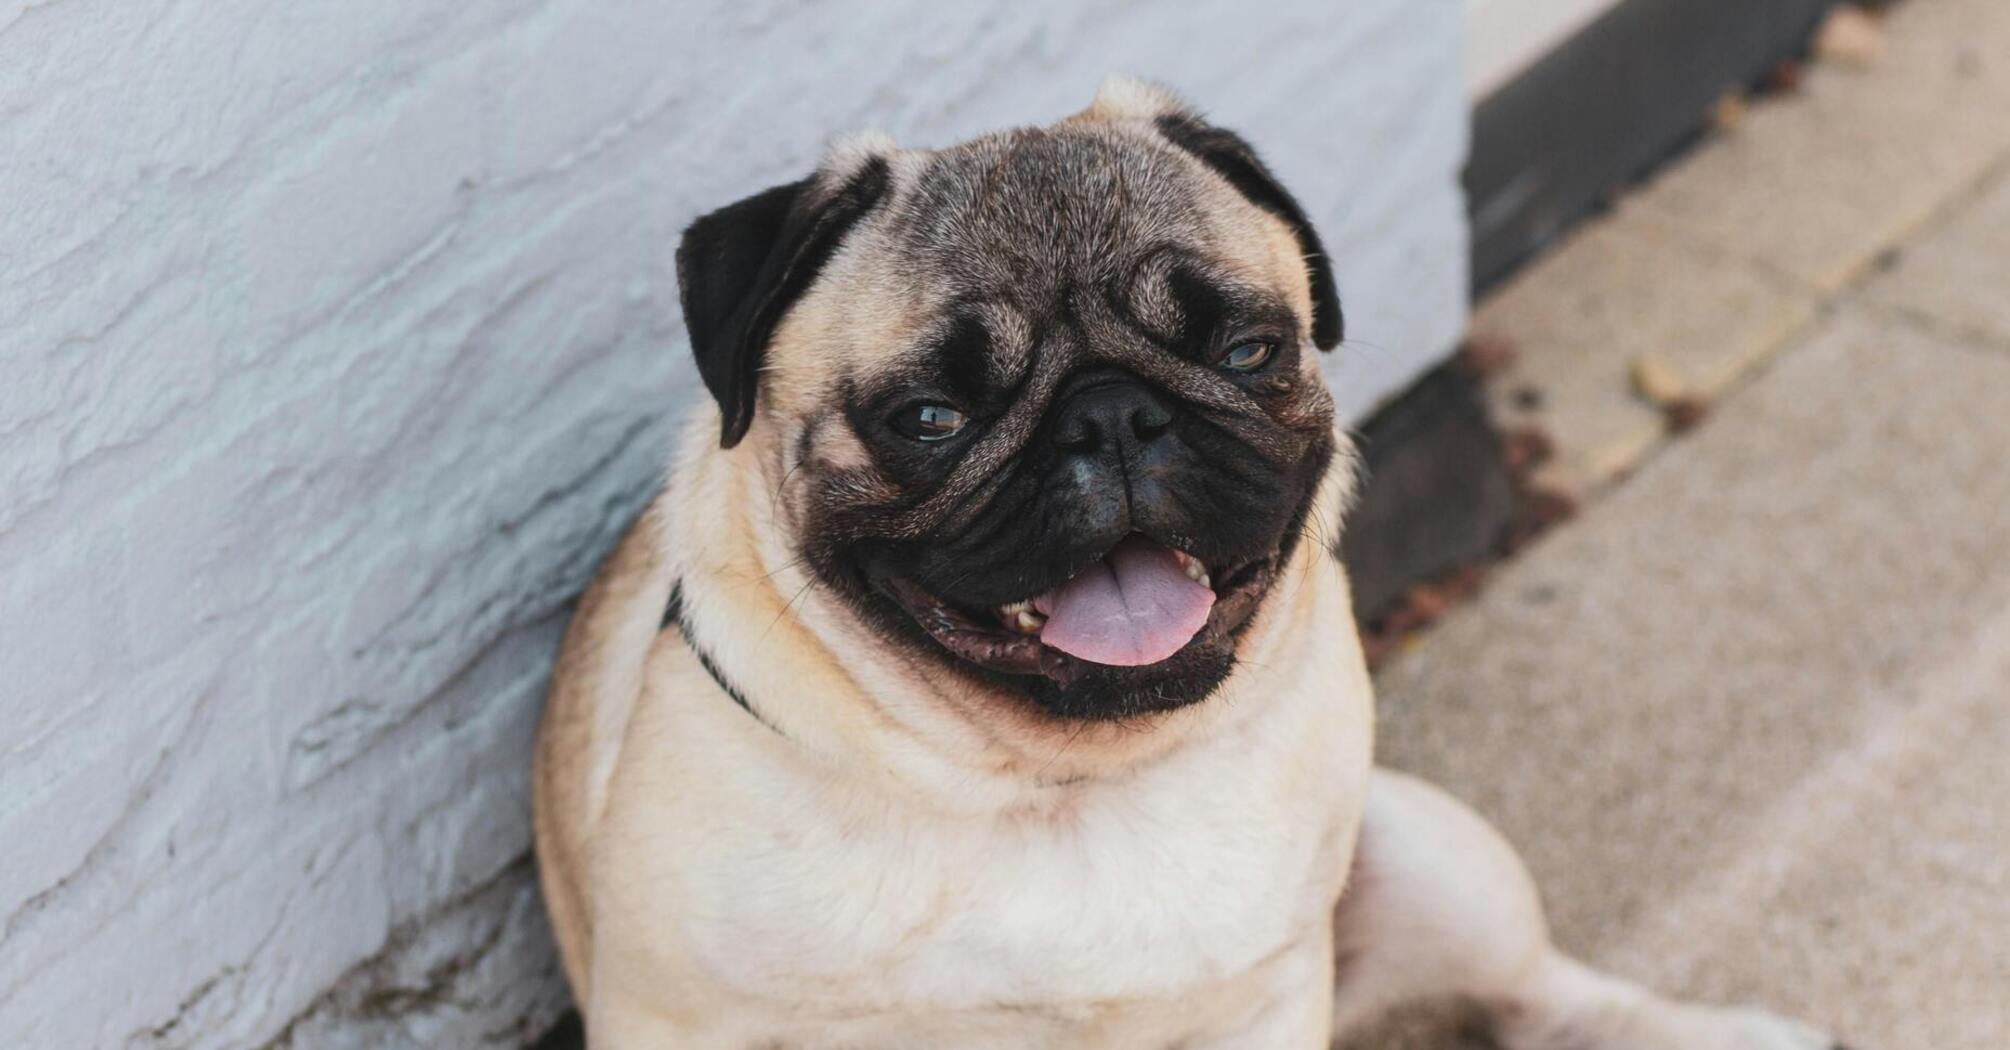 Pug: Advantages and disadvantages of the breed that you should know